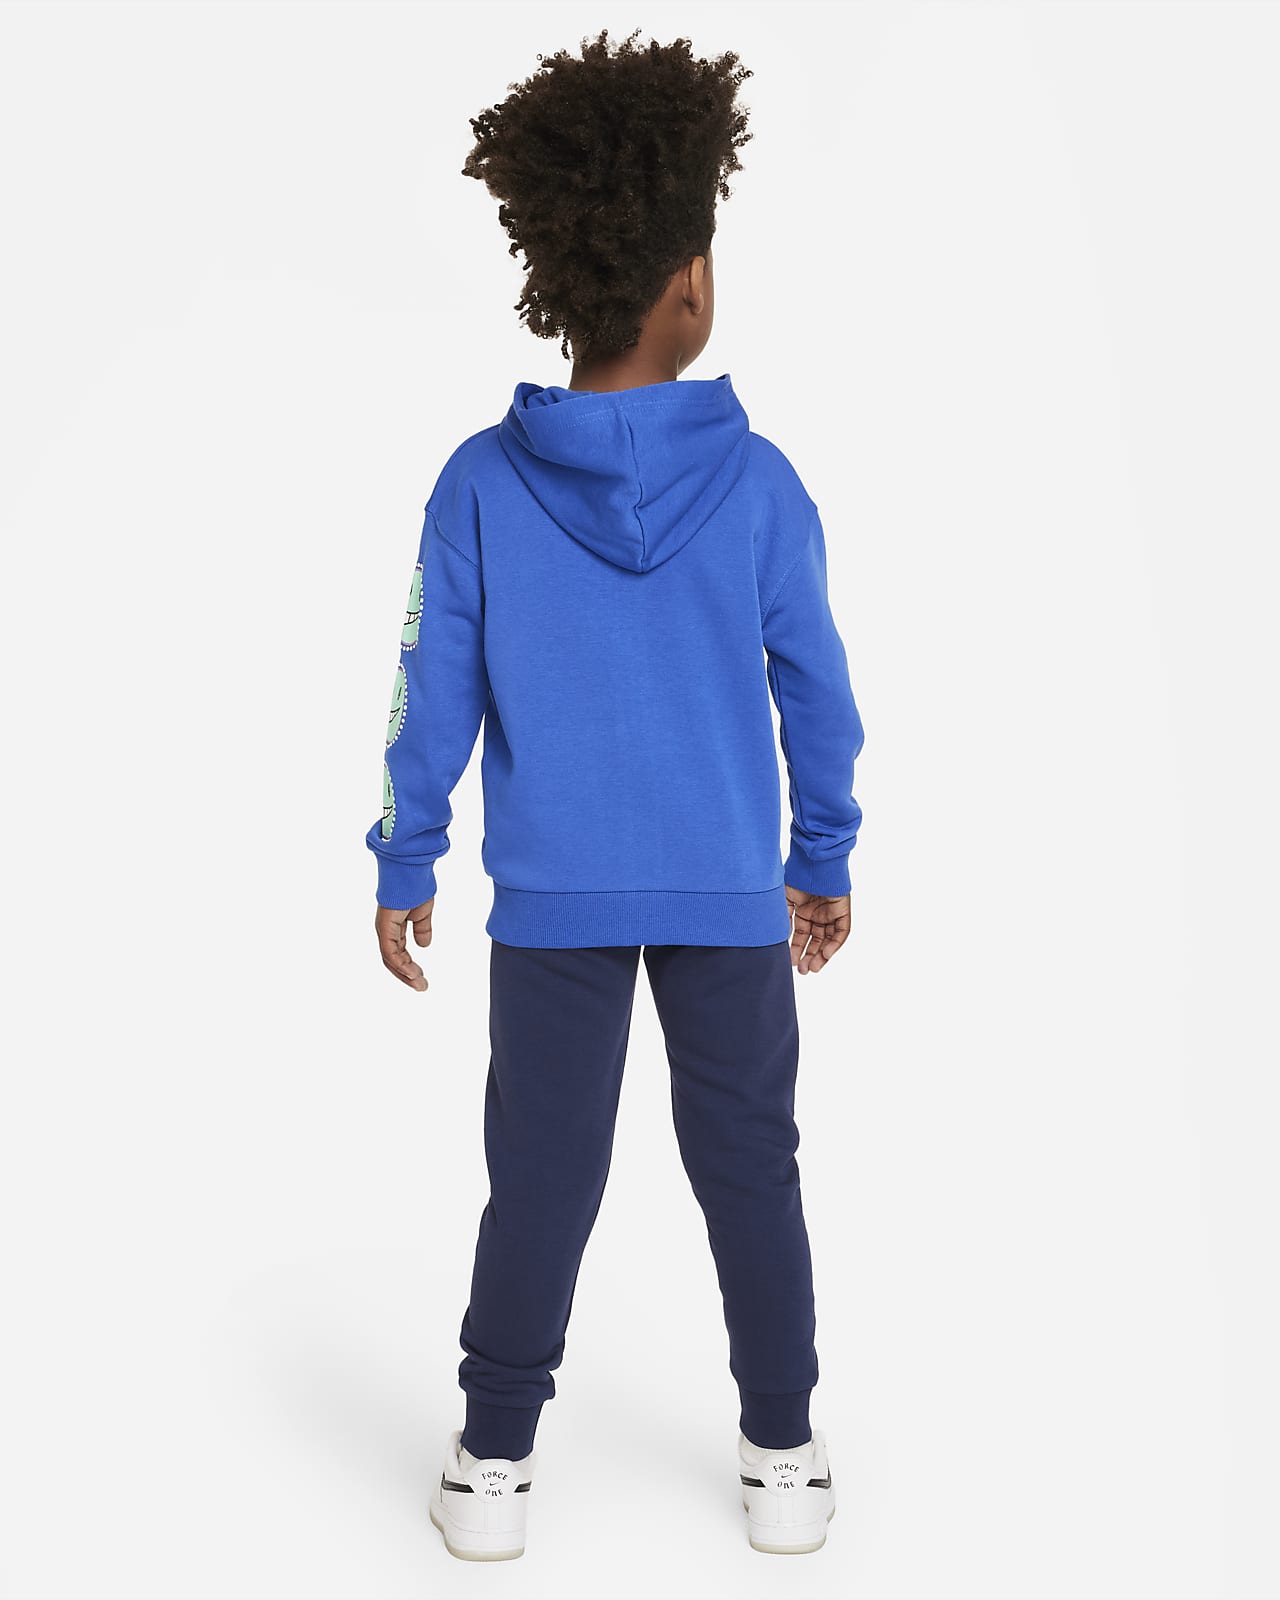 Nike Sportswear 'Art of Play' French Terry Full-Zip Set Younger